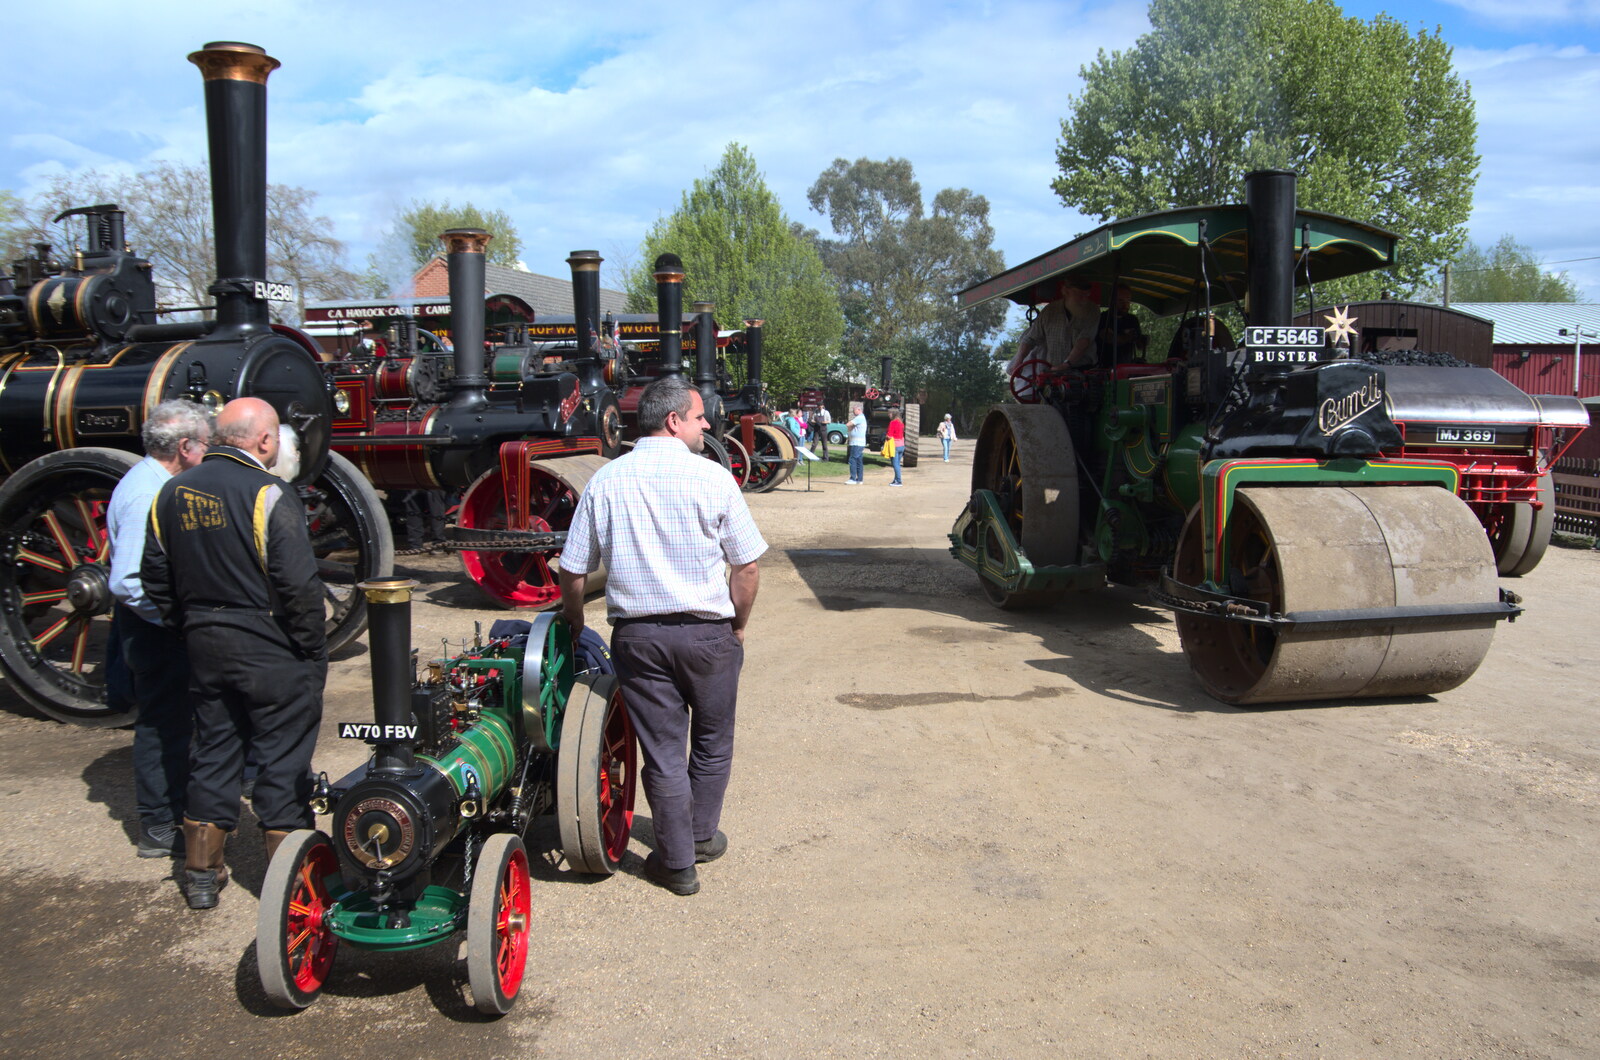 A steam roller named Buster clanks around from The Heritage Steam Gala, Bressingham Steam Museum, Norfolk - 1st May 2023